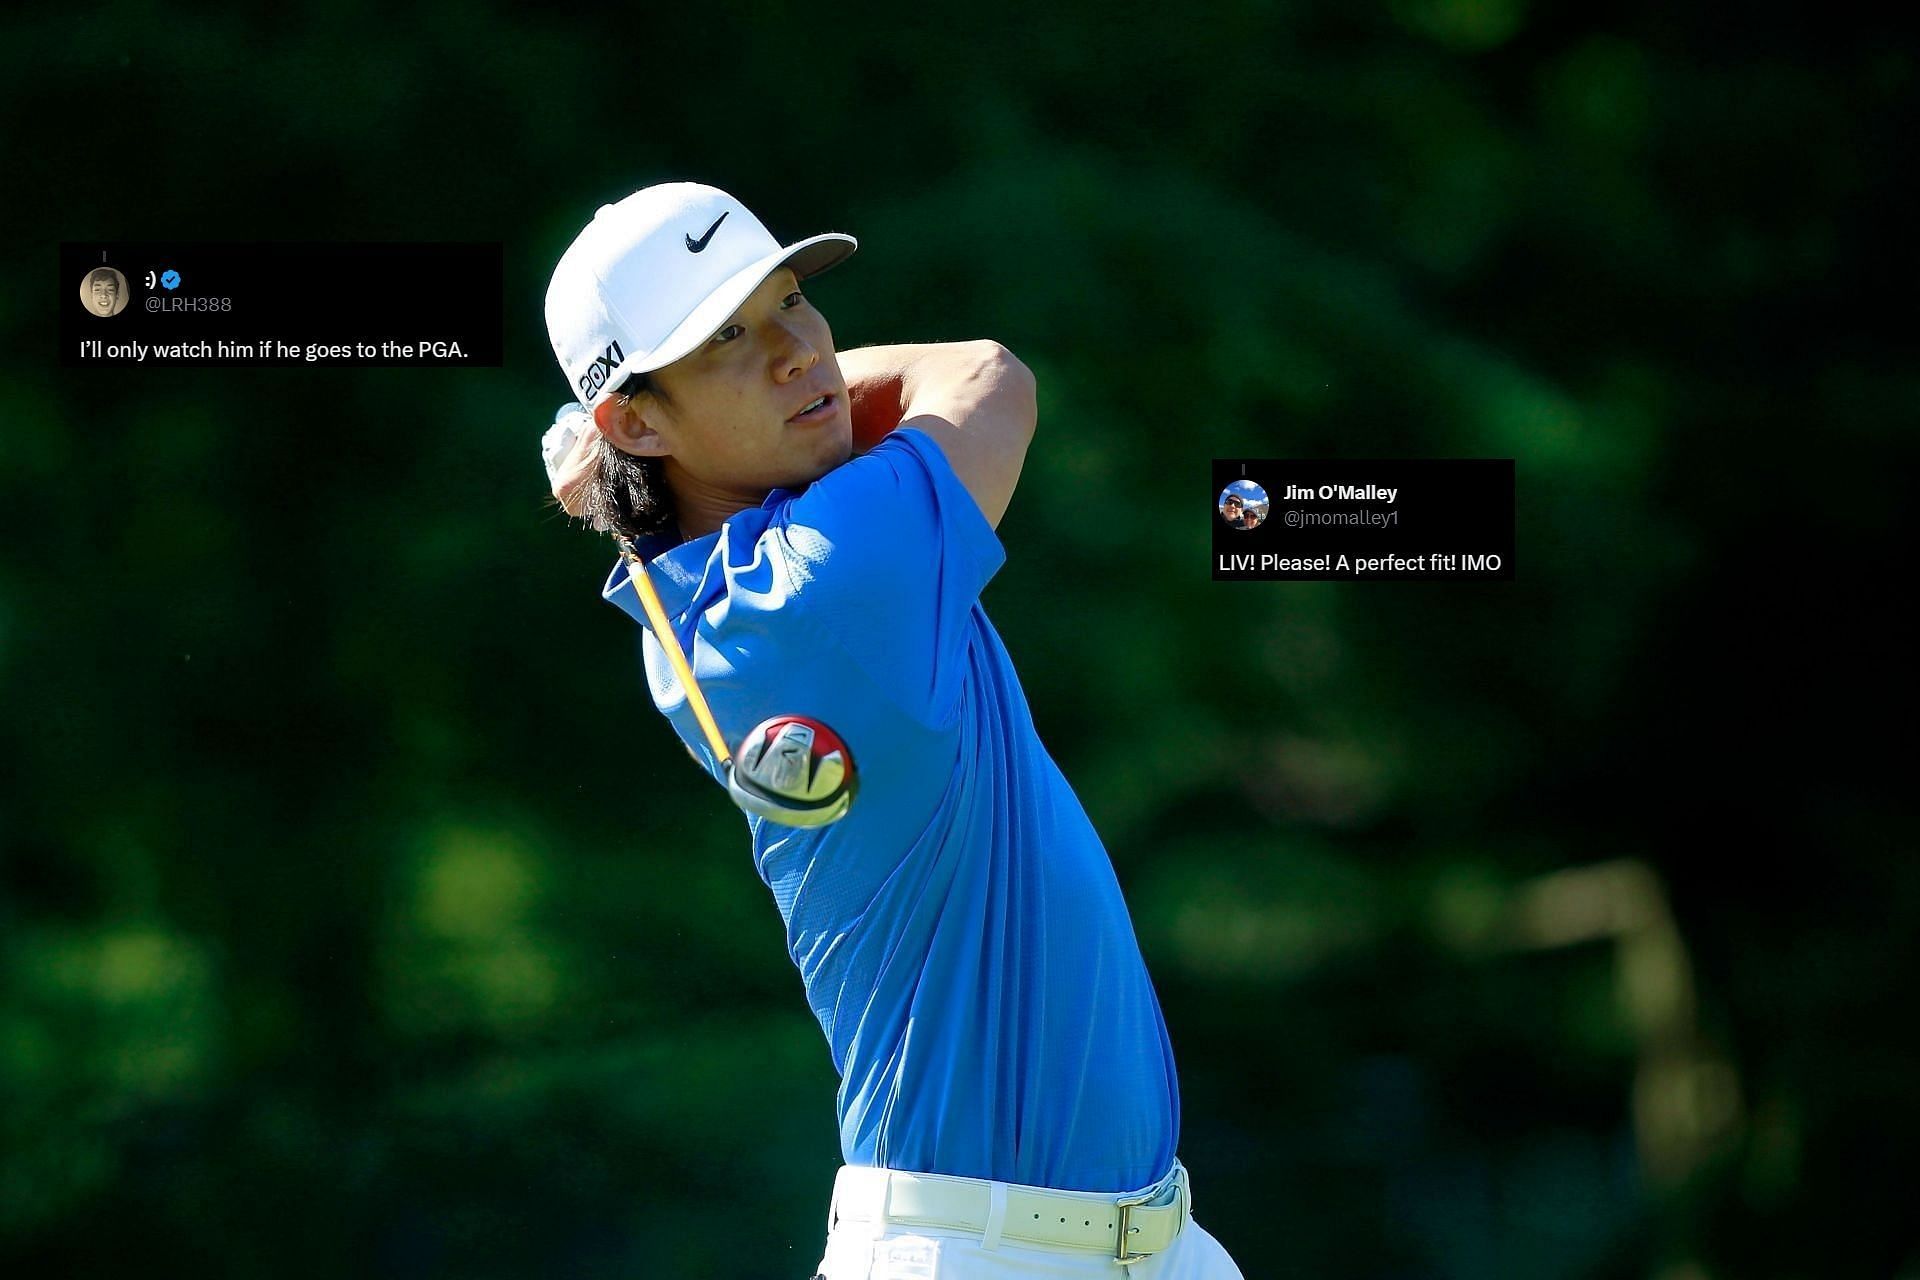 Anthony Kim is reportedly in talks with PGA Tour and LIV Golf for a possible comeback